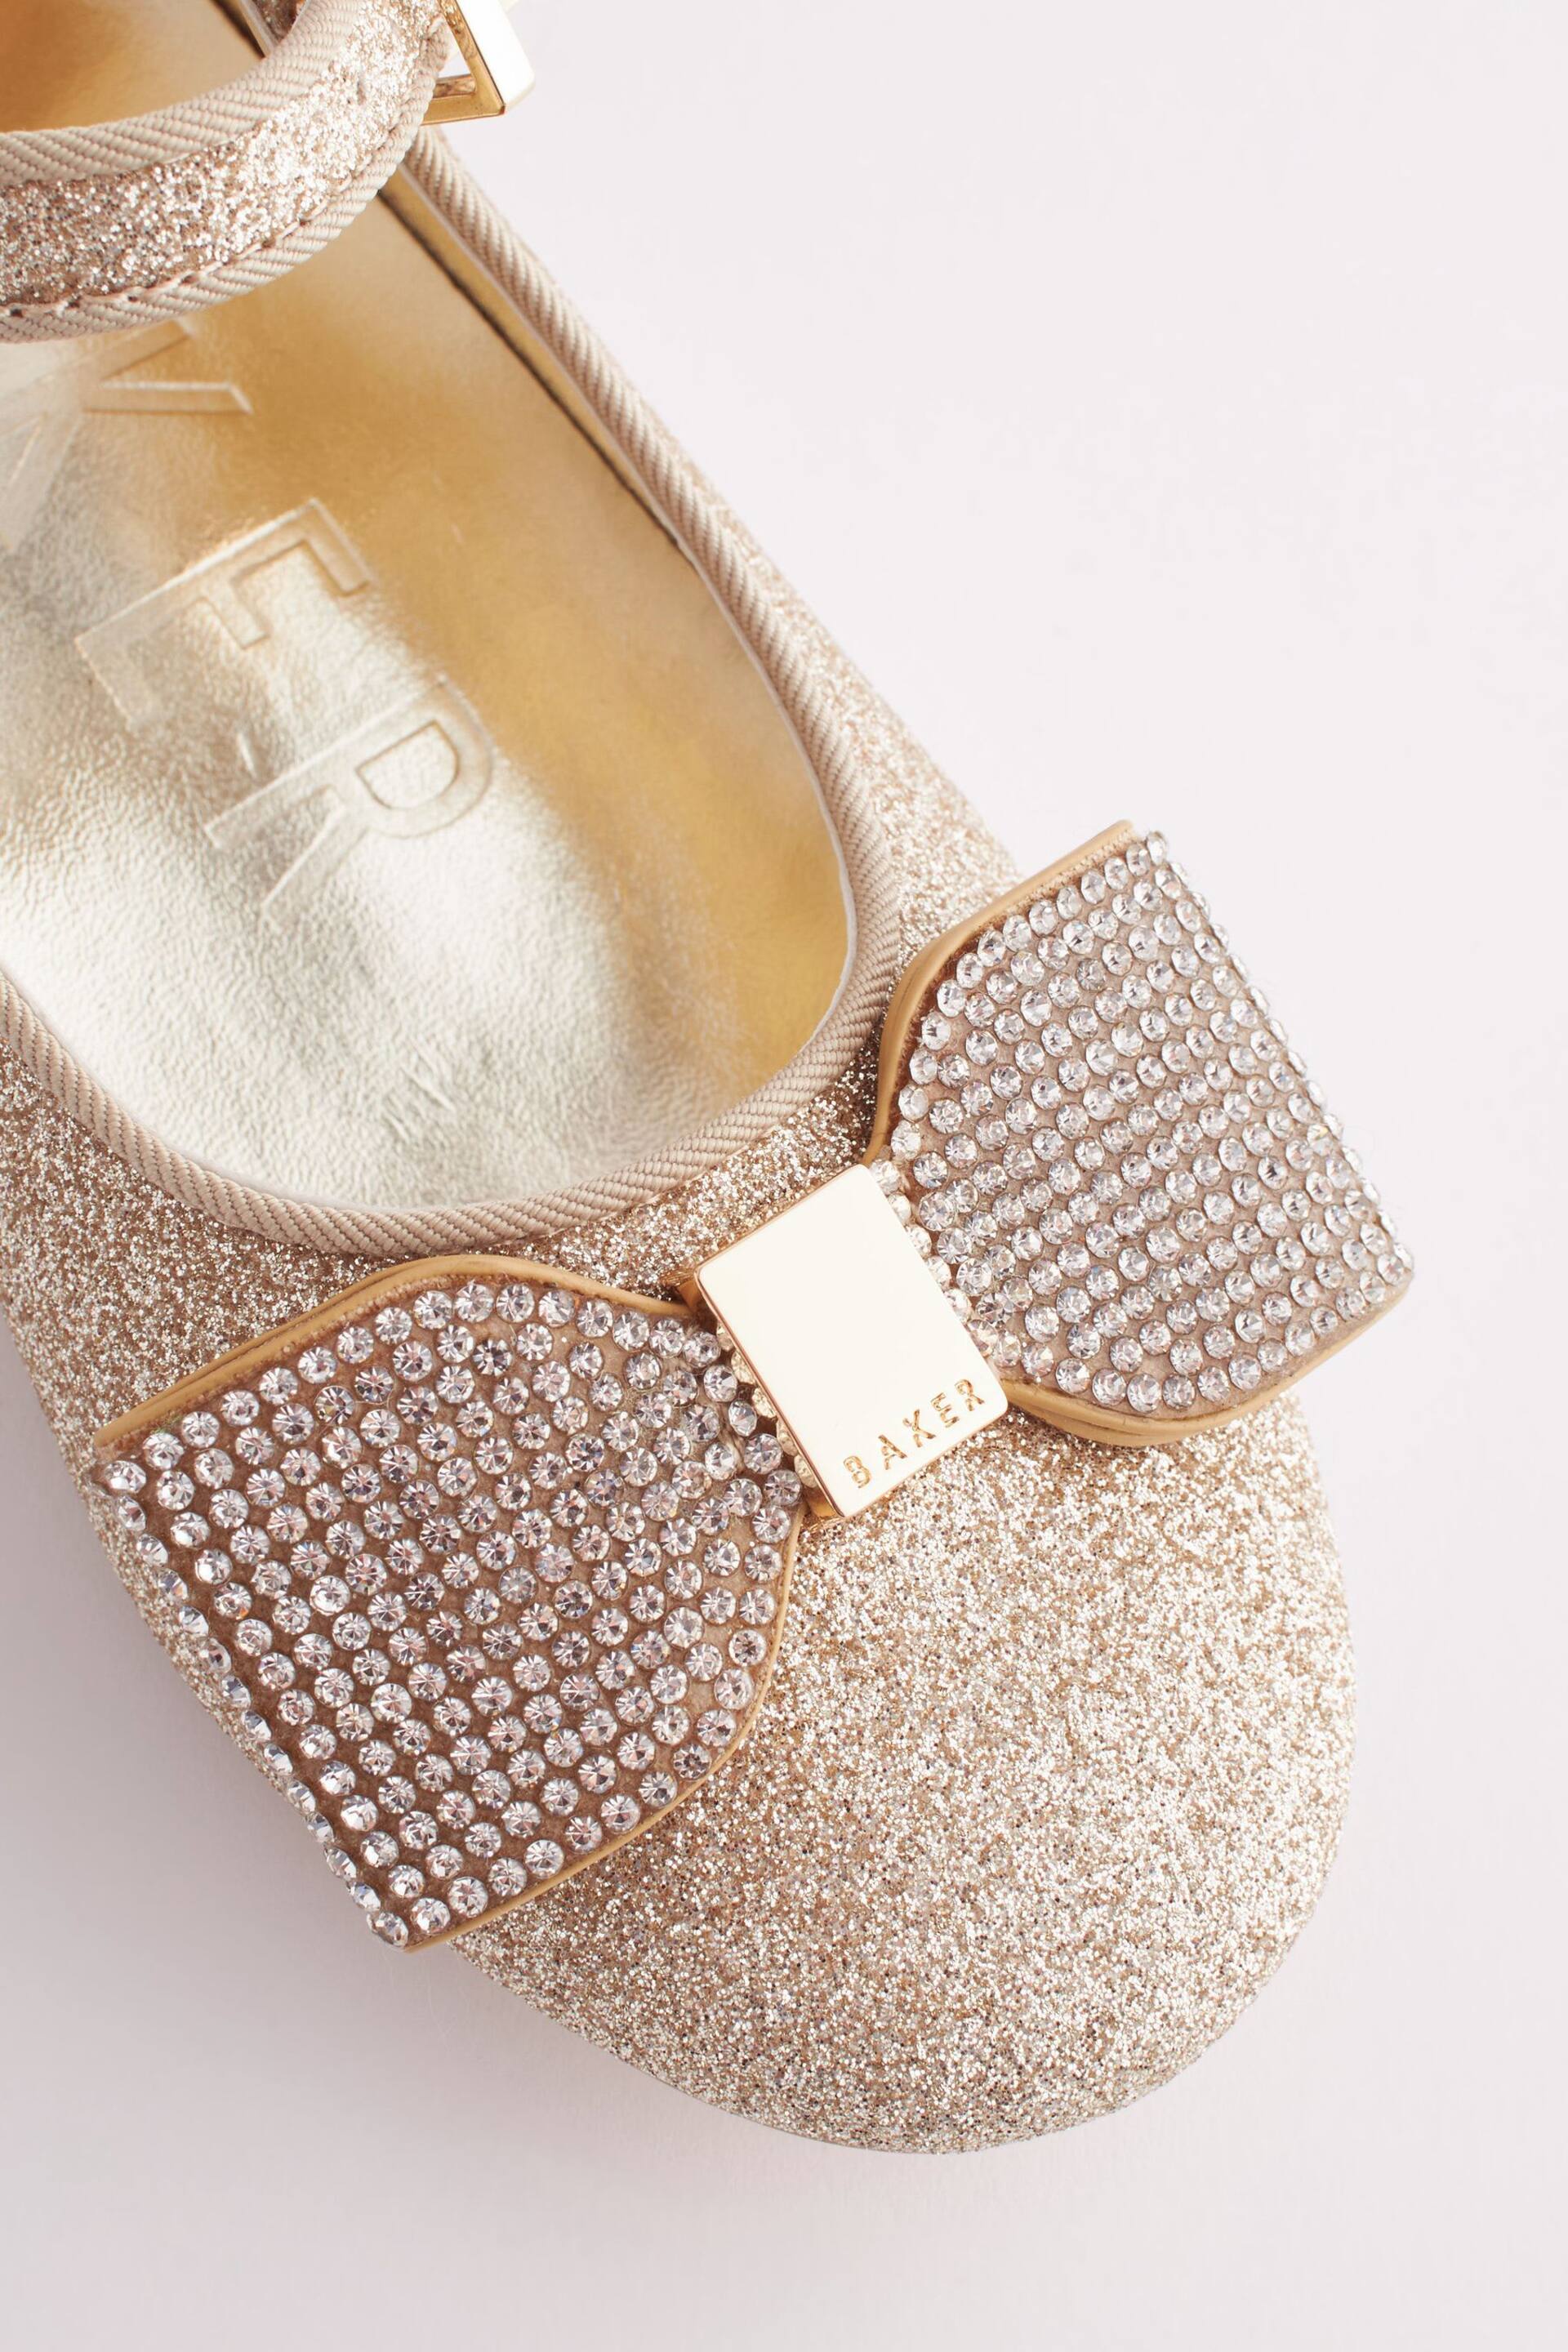 Baker by Ted Baker Girls Gold Glitter Shoes with Rhinestone Bow - Image 3 of 6